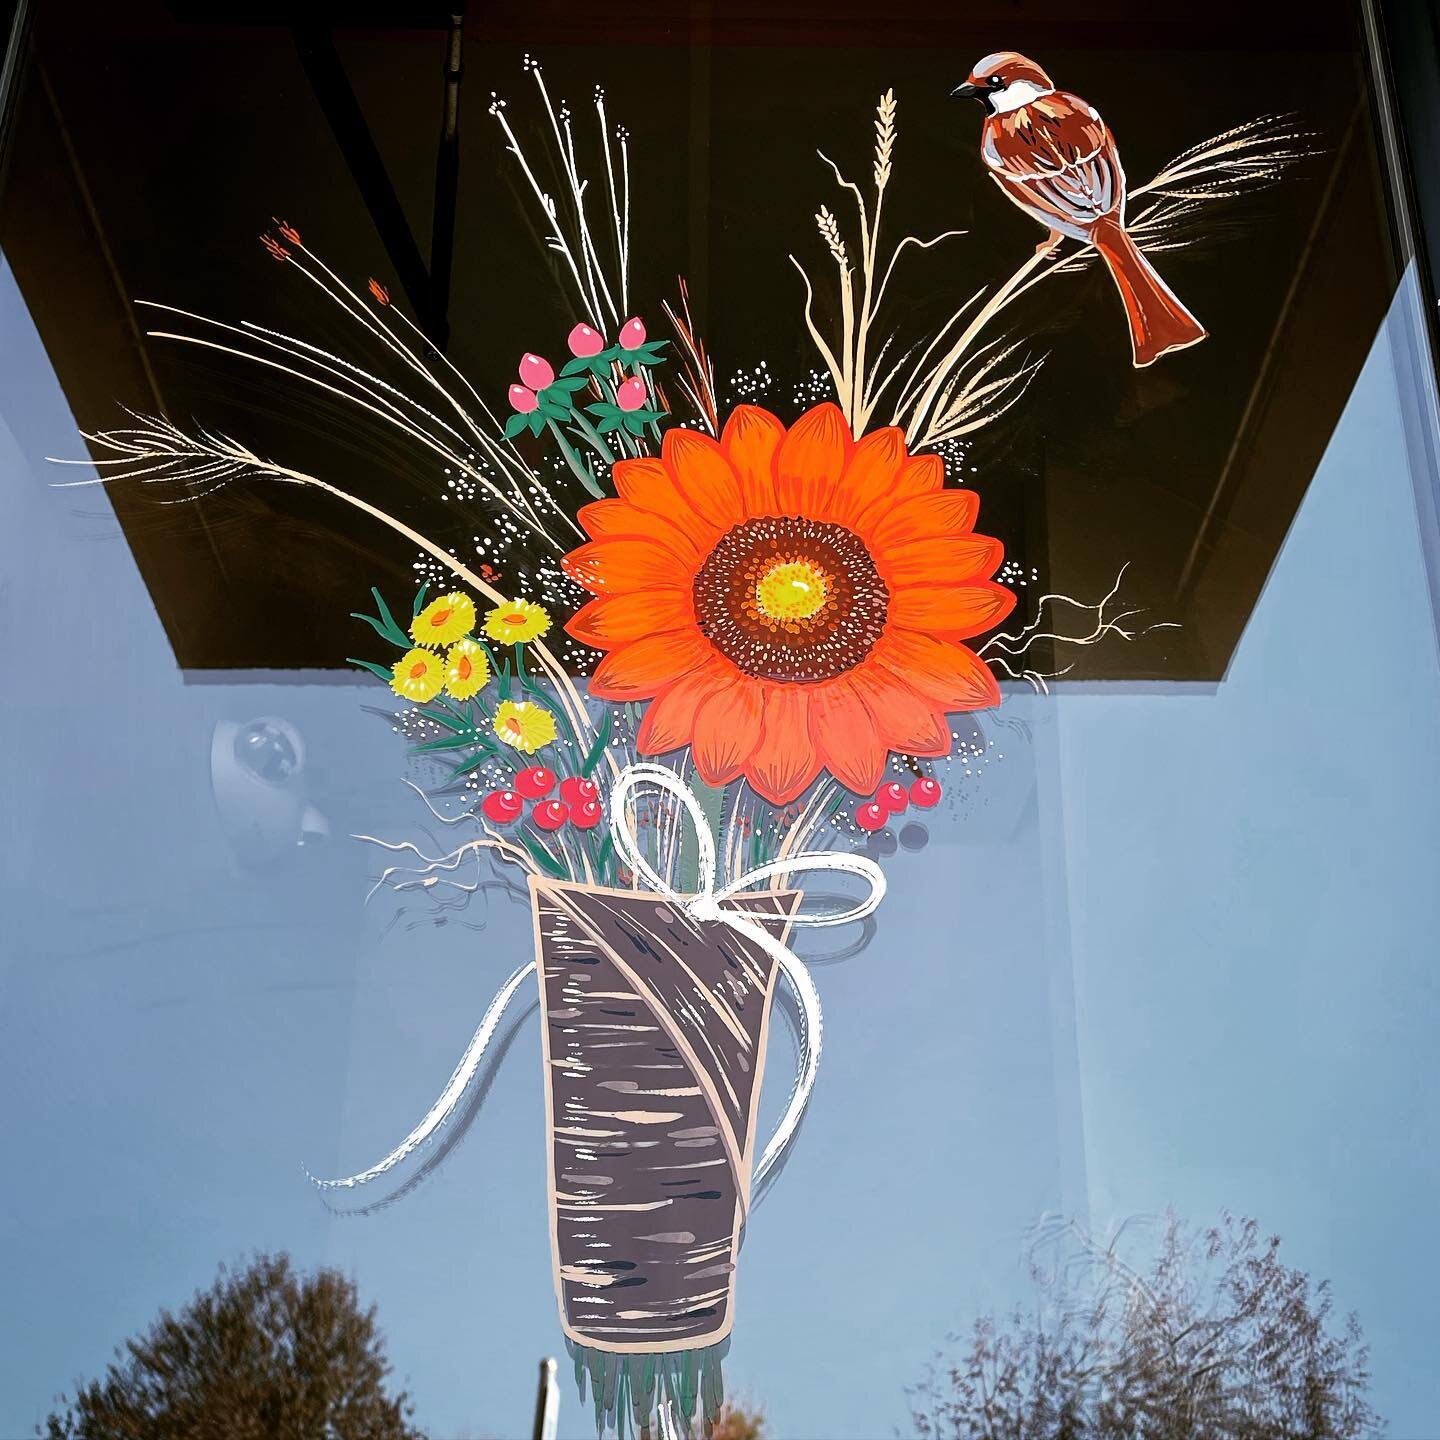 Dozens of sparrows flying around while I worked made adding a sparrow impossible to resist 🦉They&rsquo;re even nesting in the awning over the door! 🪆Autumn bouquet for Back Office Solutions&hellip; it&rsquo;s the employee door, how sweet is that?
.